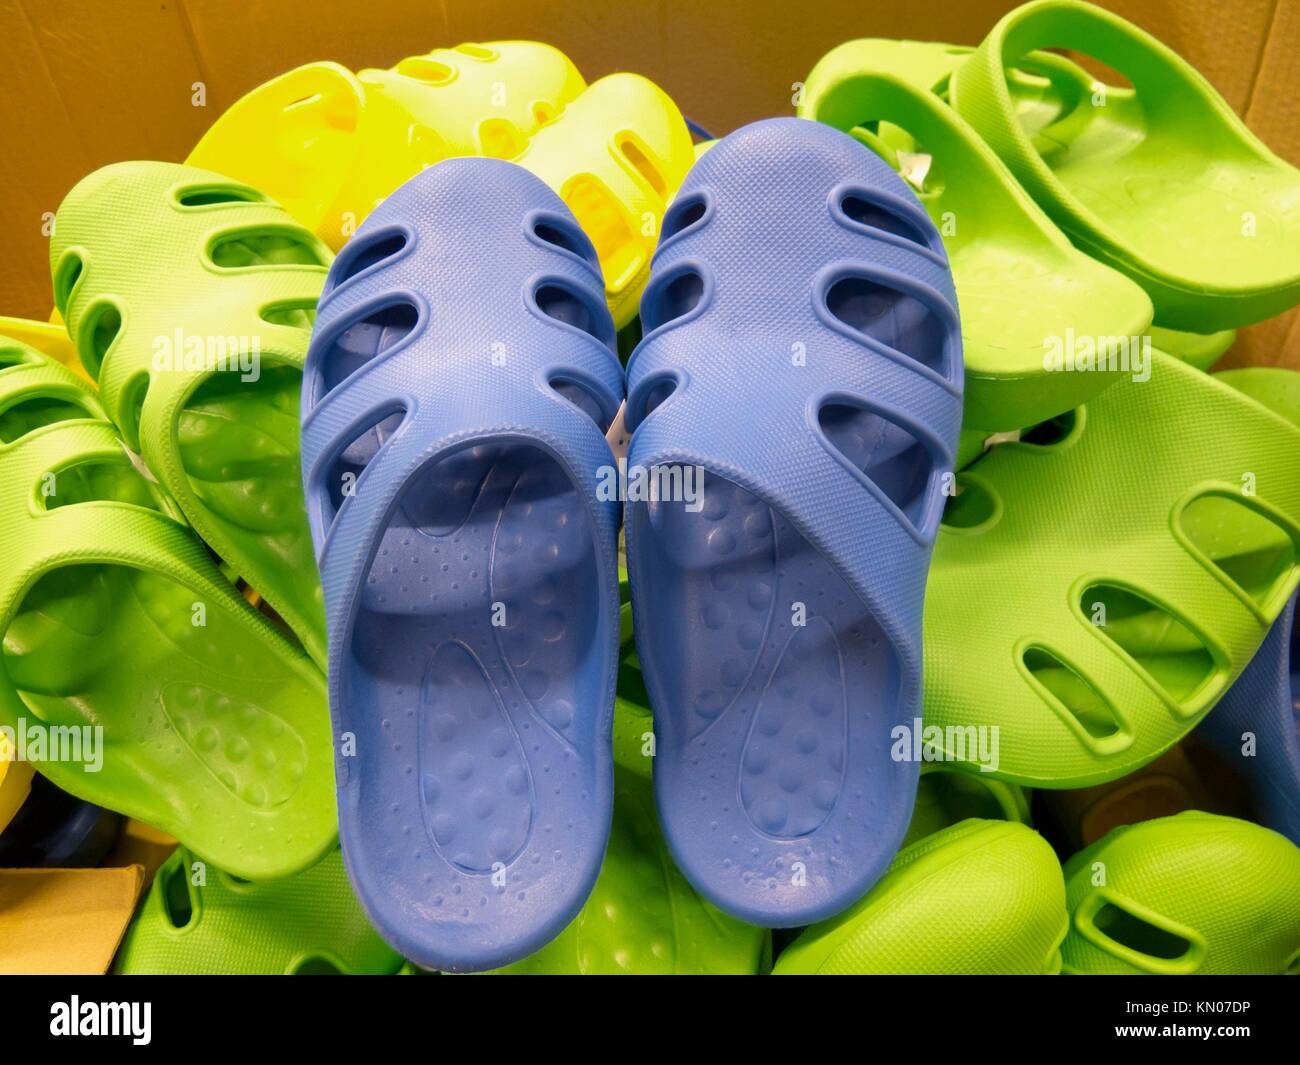 Cheap rubber sandals imitating the 